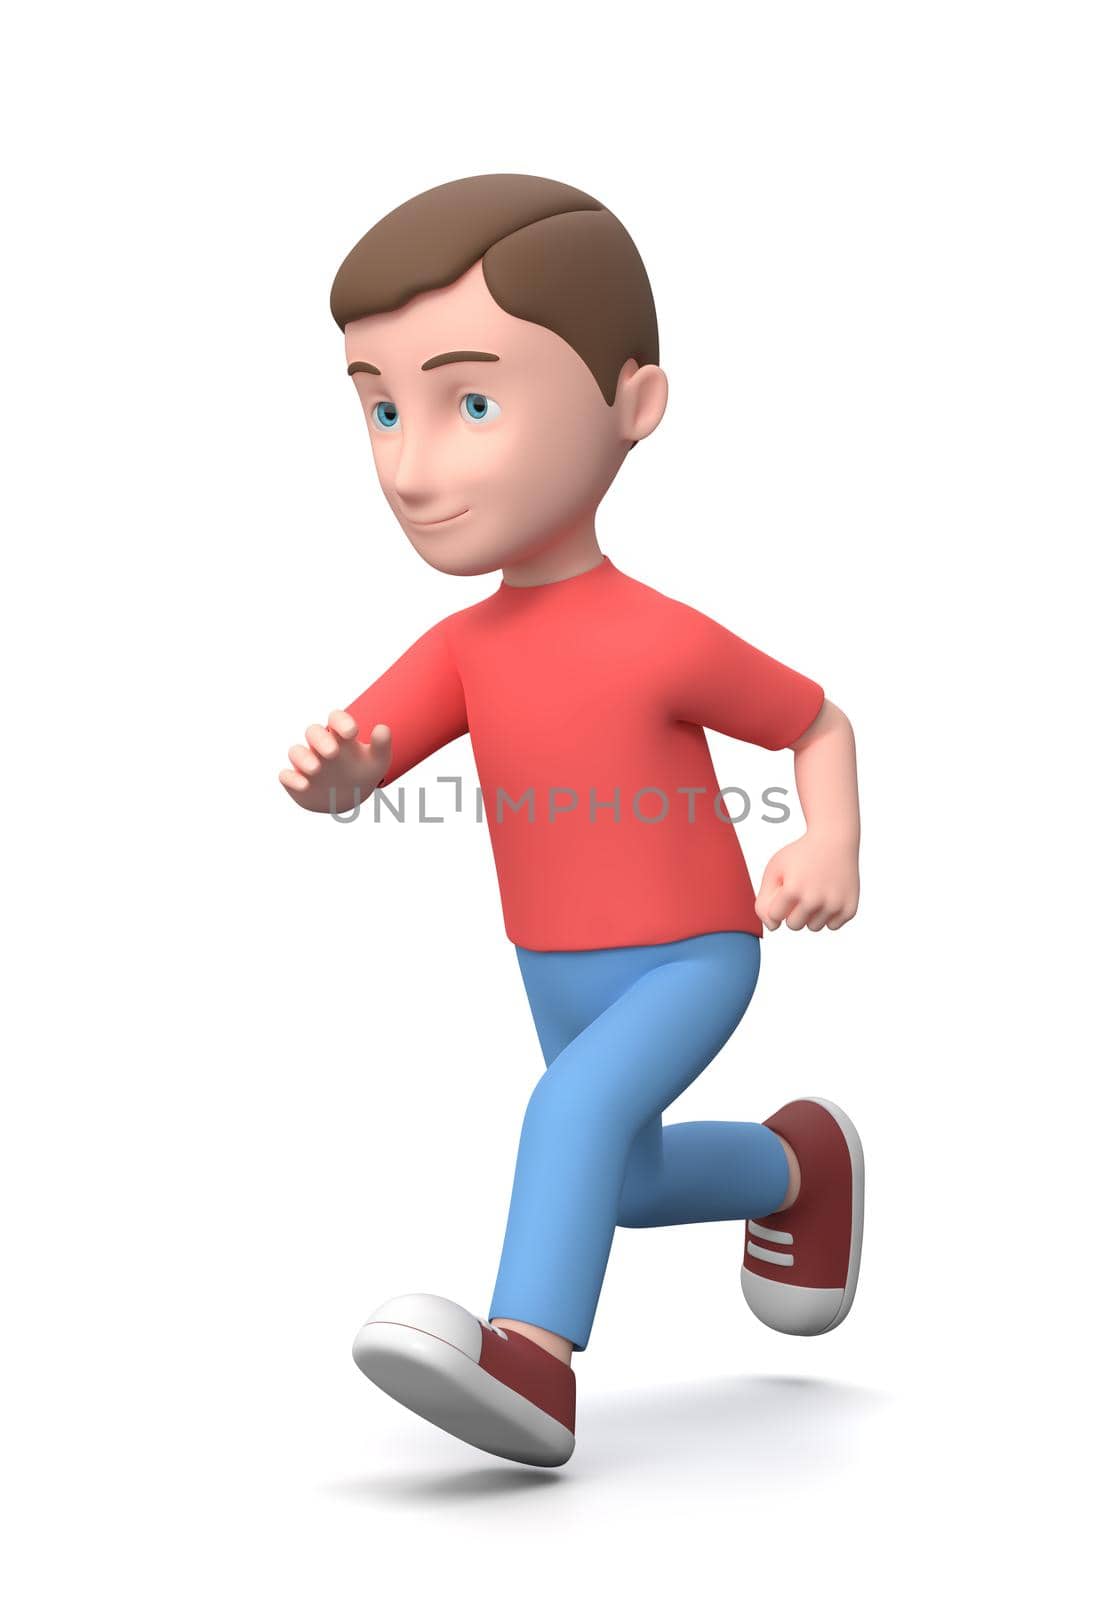 Smiling Young Kid Running. 3D Cartoon Character Isolated on White Background 3D Illustration